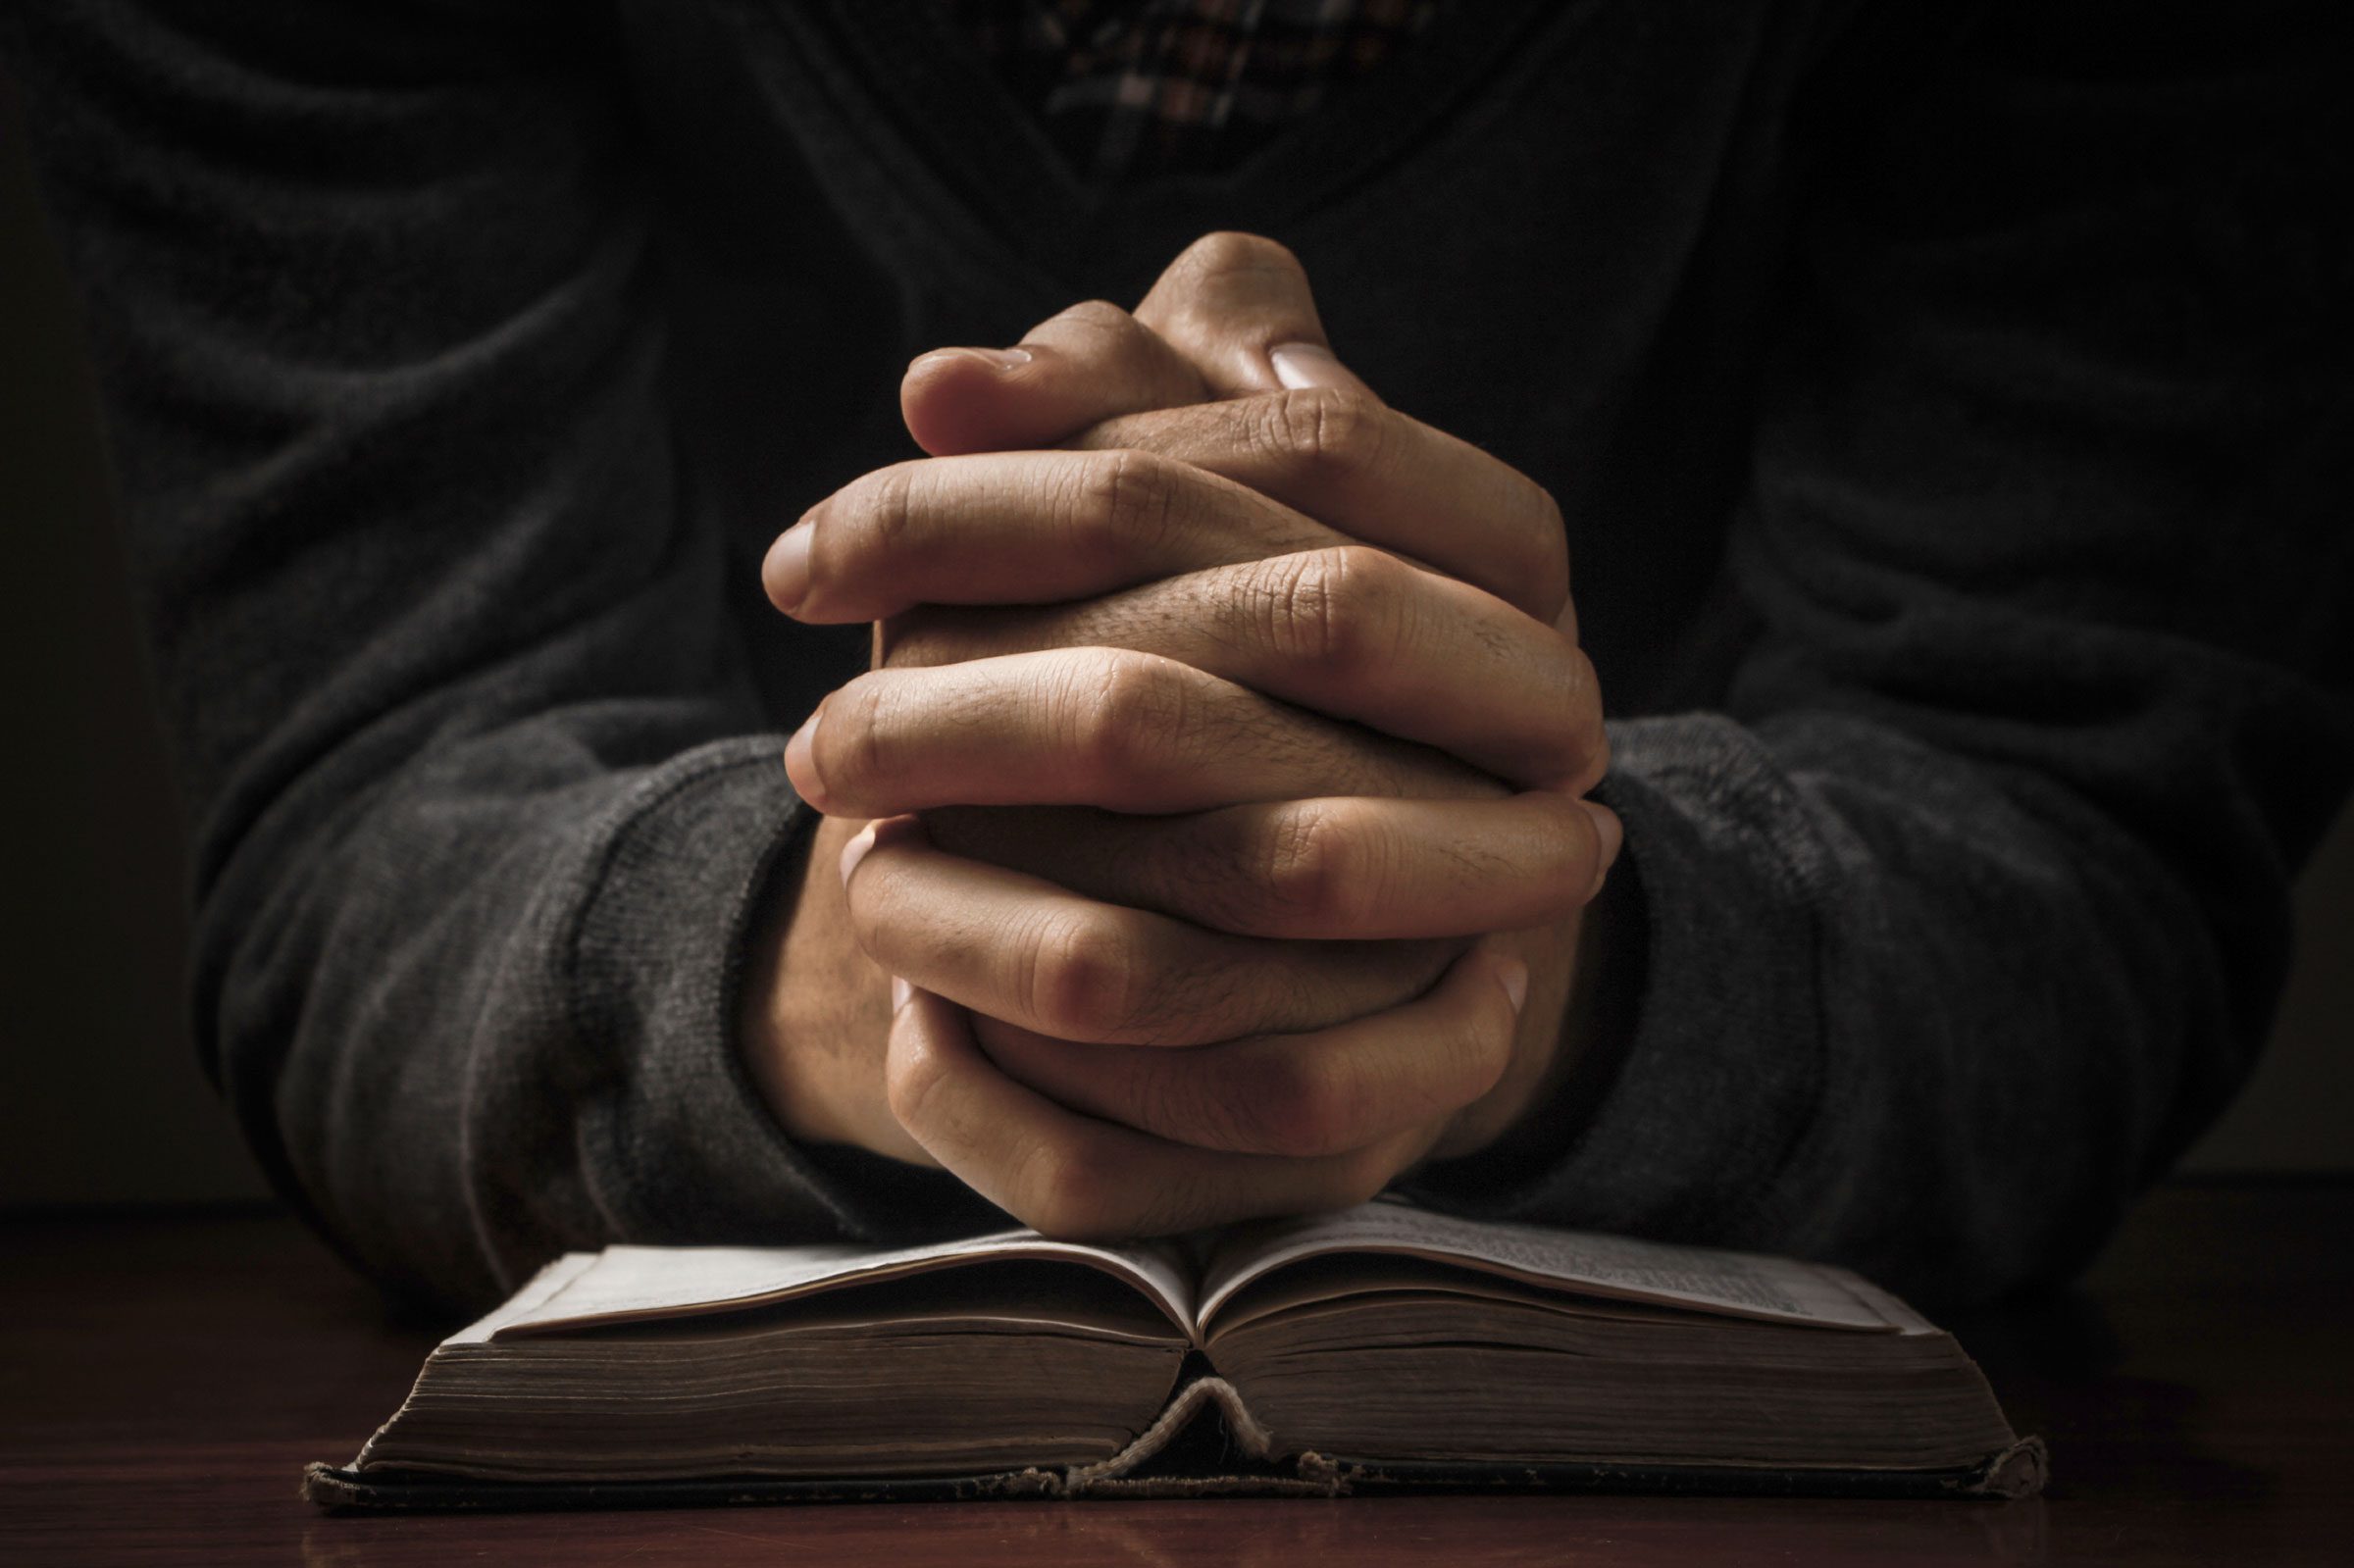 hands folded in prayer over bible